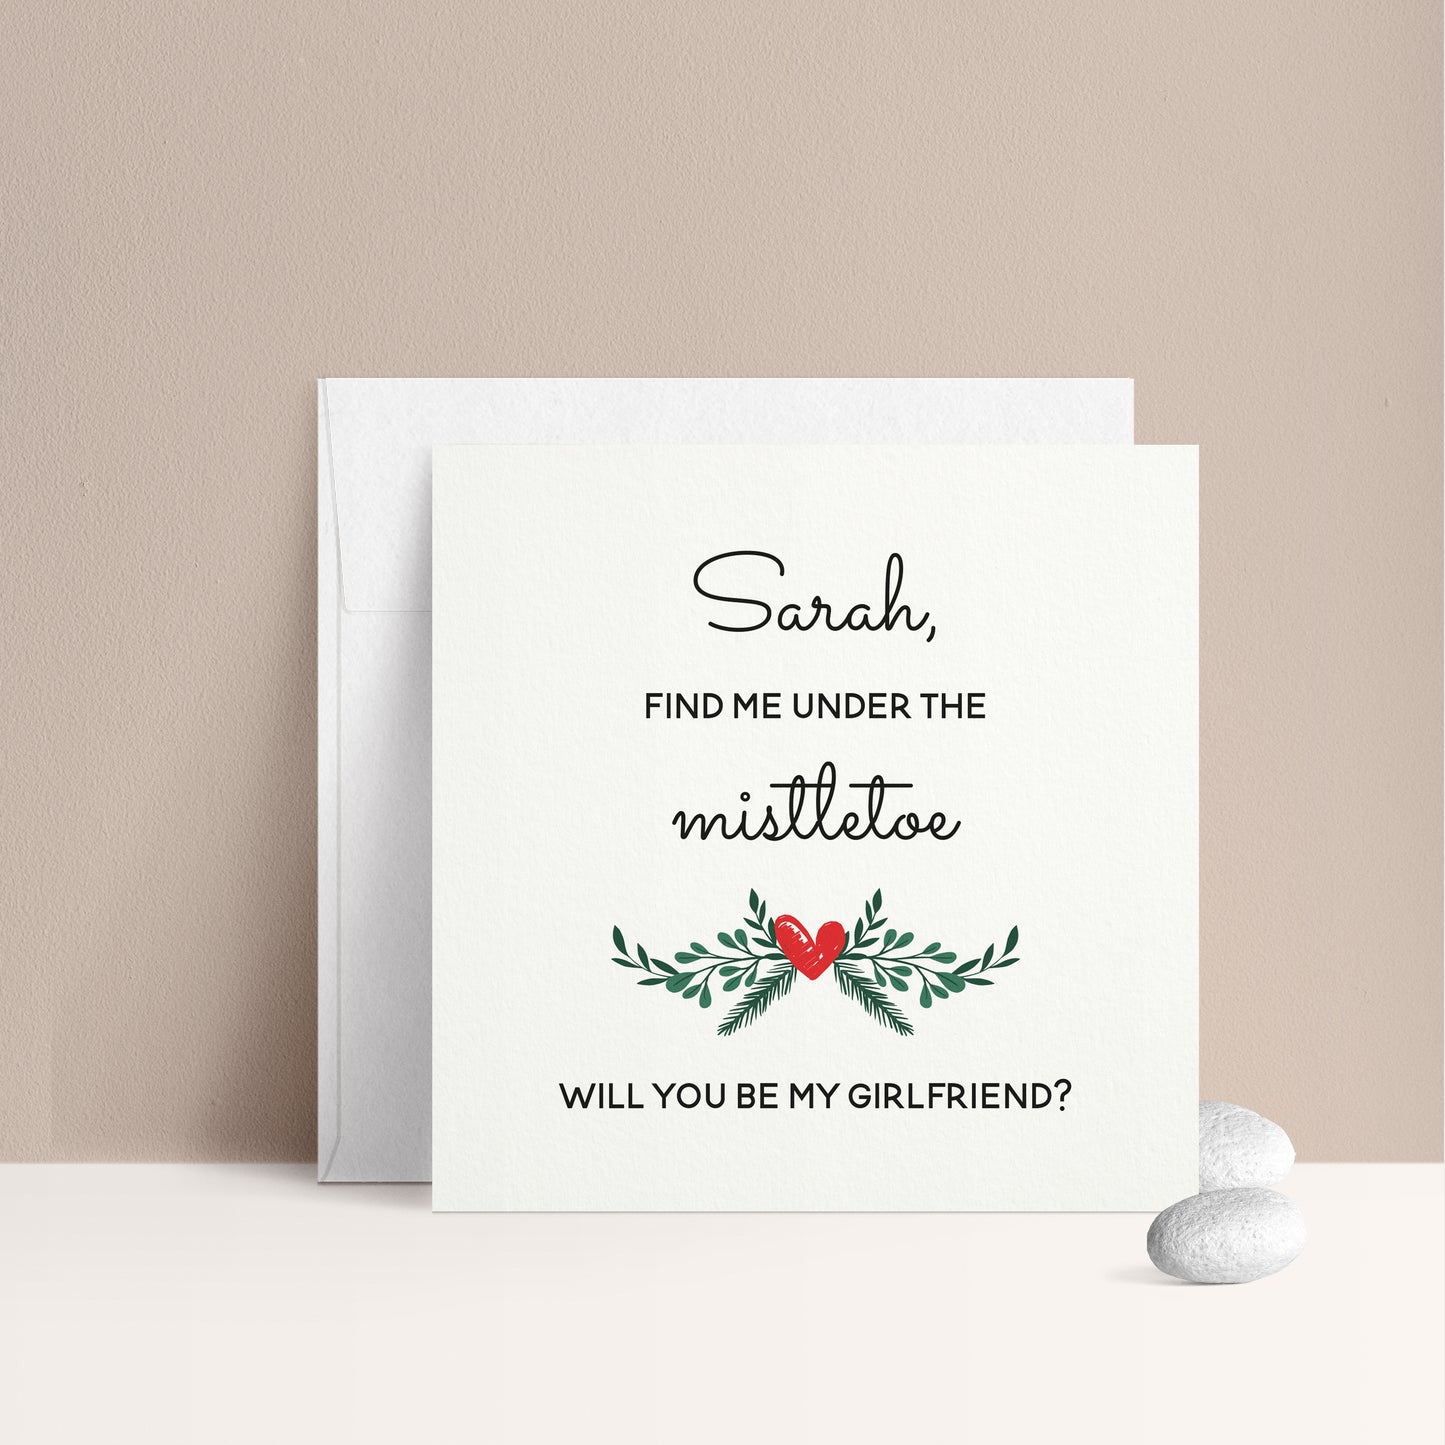 find me under the mistletoe christmas card to ask will you be my girlfriend with greenery design - XOXOKristen